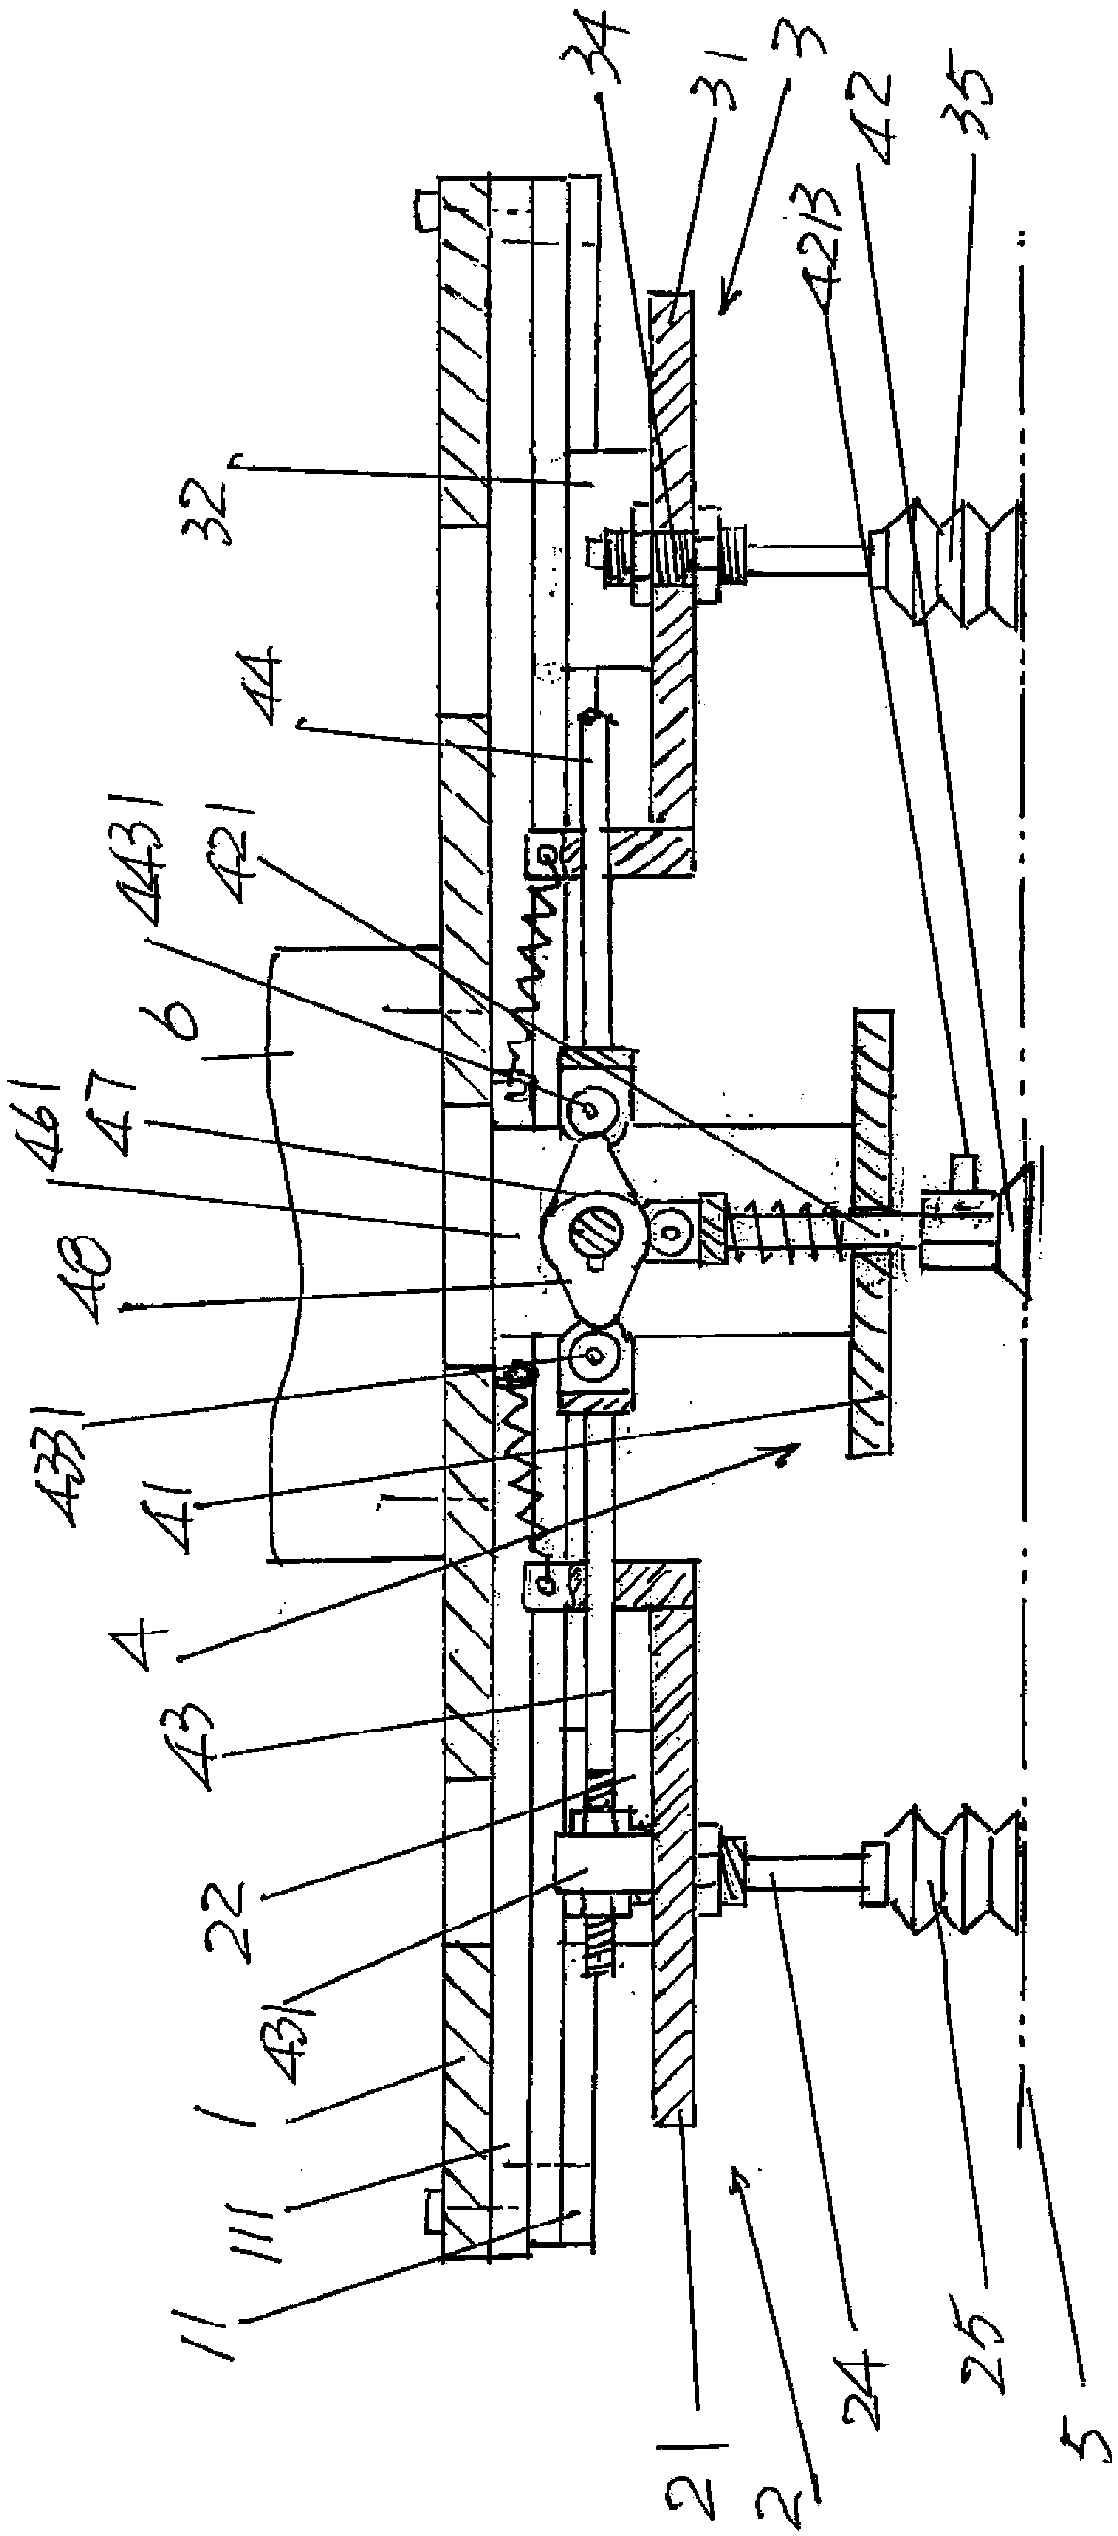 Vacuum material taking device for being connected to mechanical arm